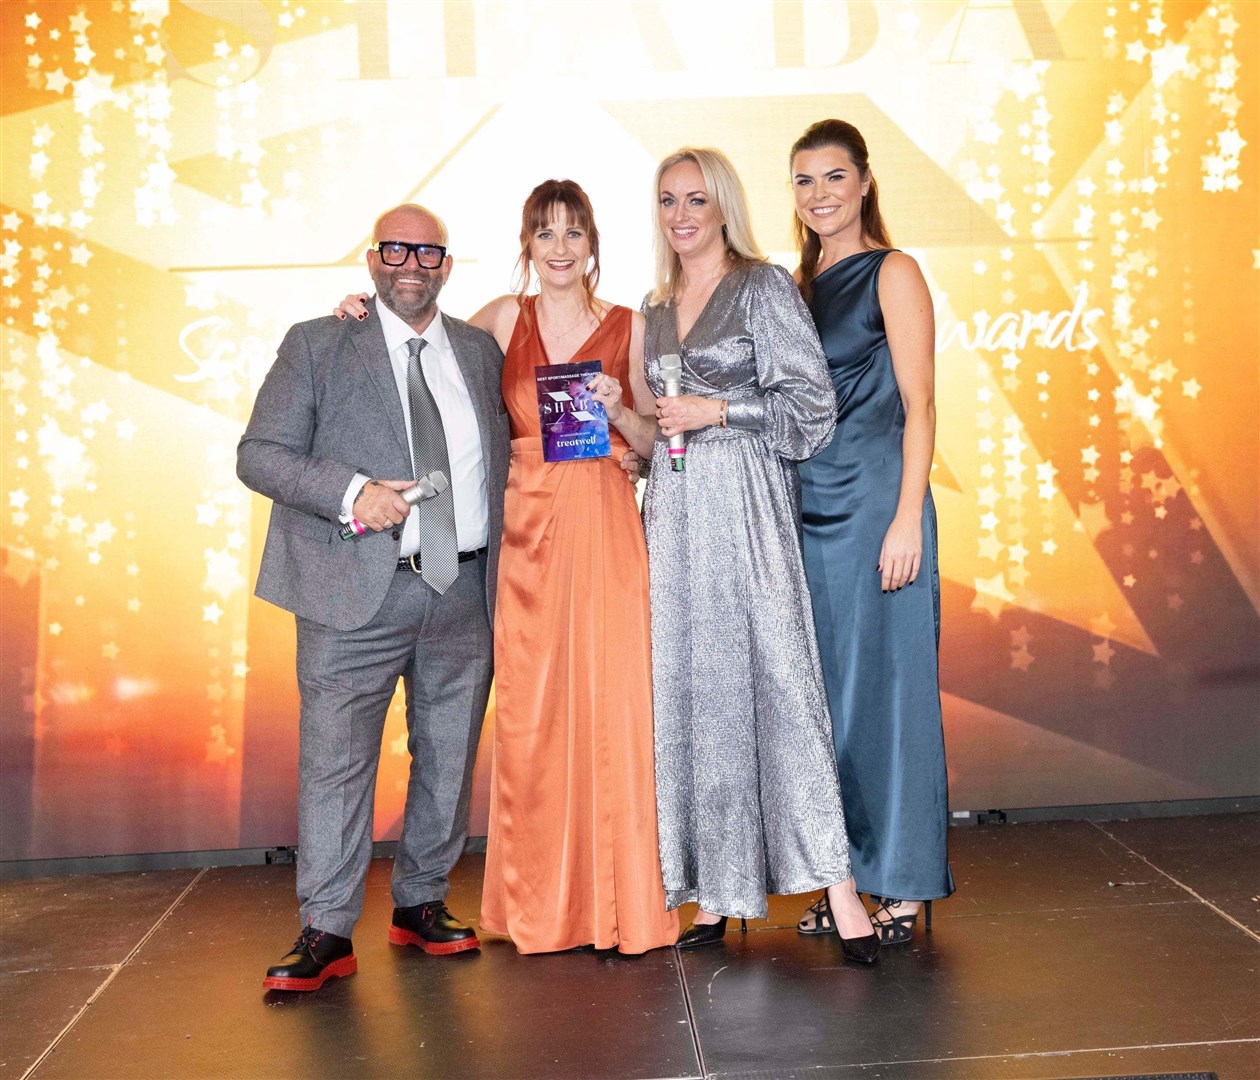 Kerry, in the orange dress, with her award for Best Massage at the SHABAs last month.